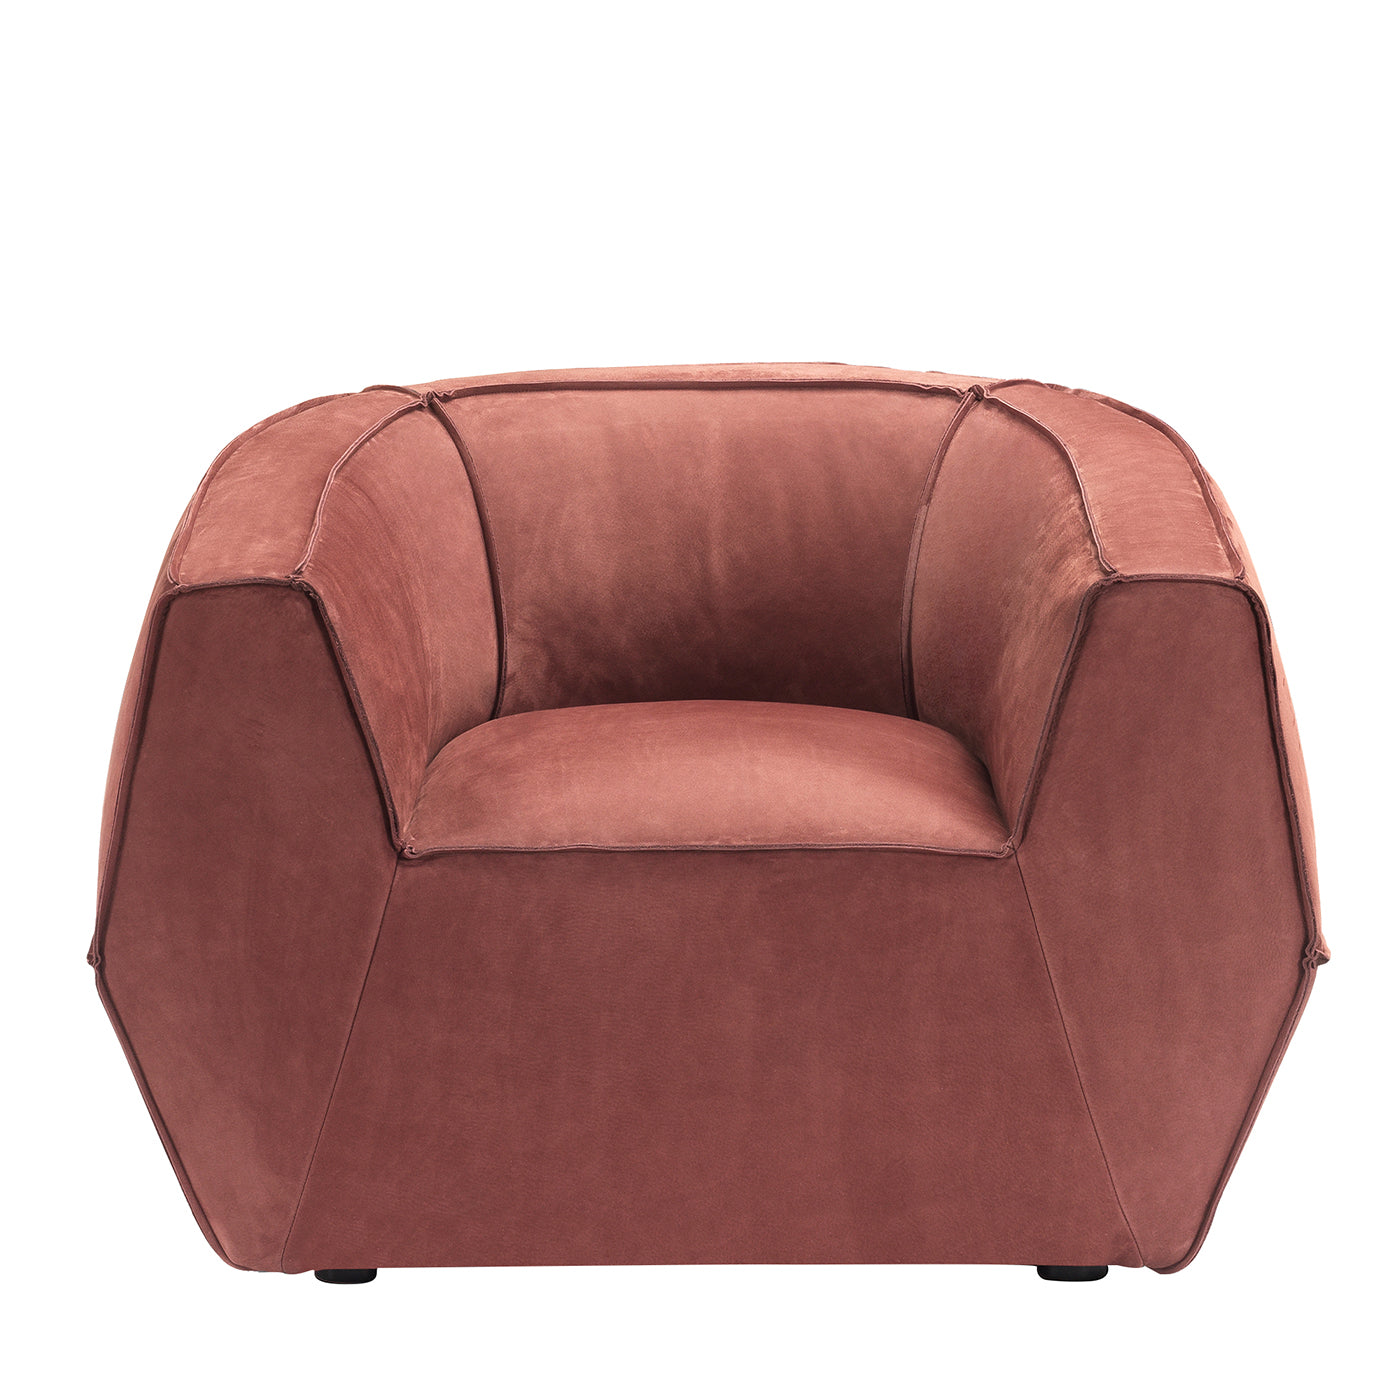 Infinito Red Armchair by Lorenza Bozzoli - Main view